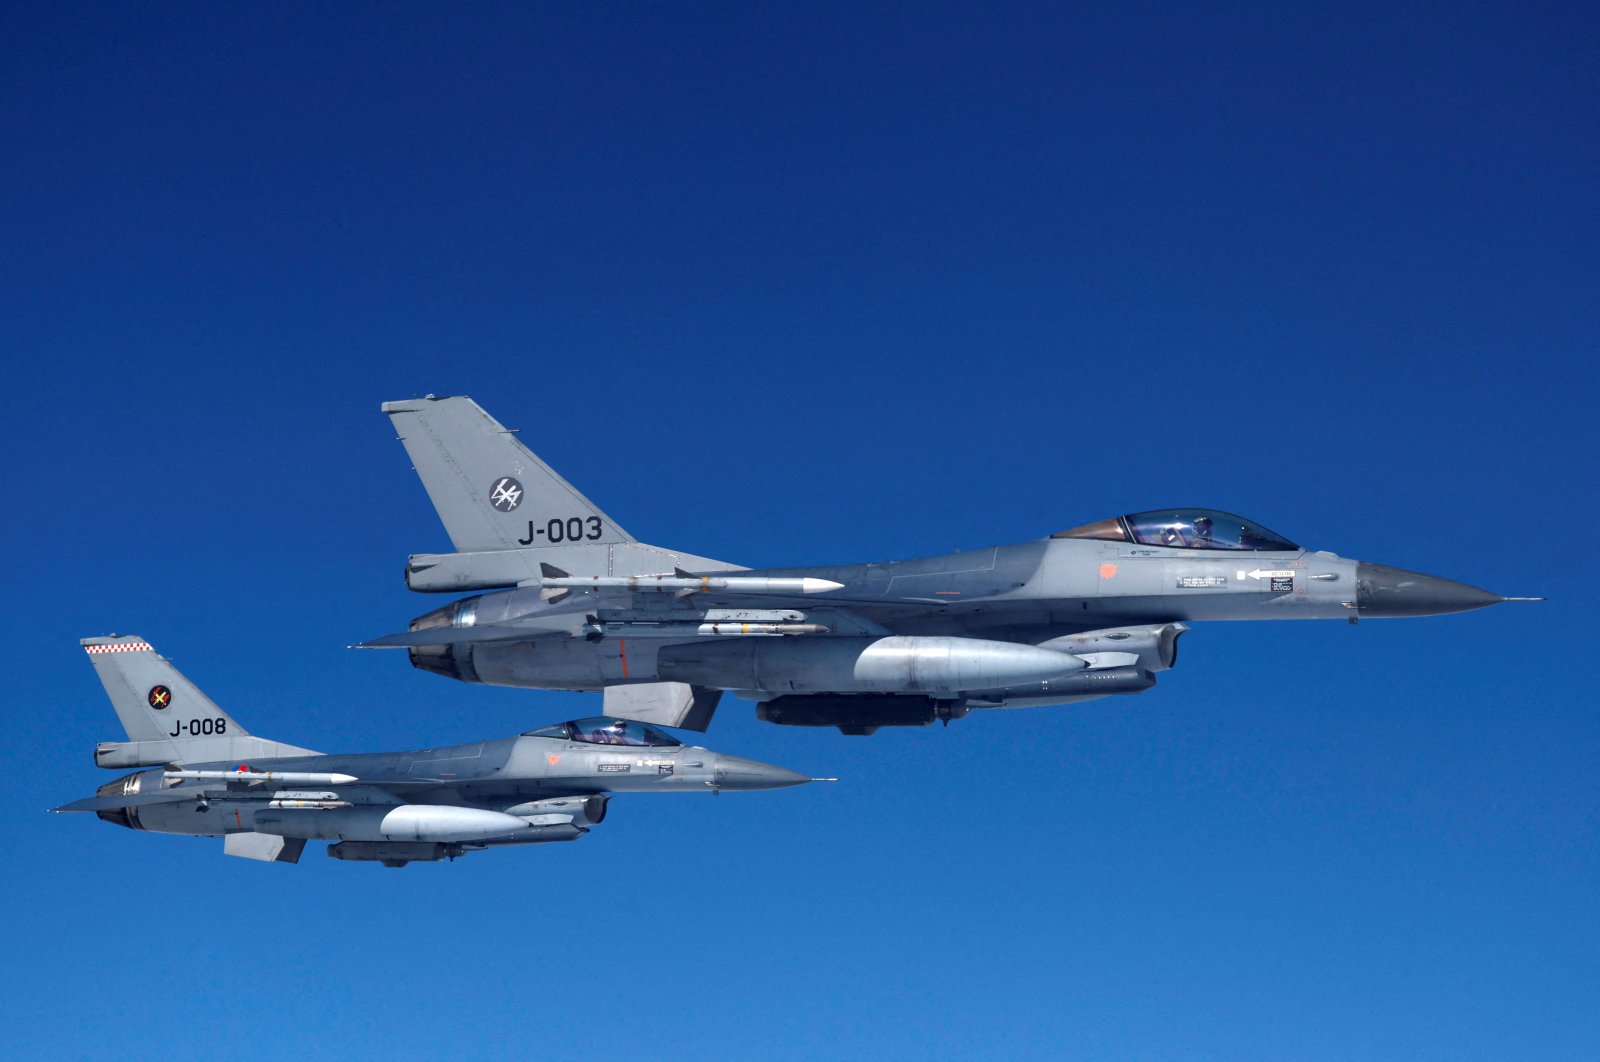 Netherlands&#039; Air Force F-16 fighter jets fly alongside an aircraft simulating aerial interceptions during a media day illustrating how NATO Air Policing safeguards the Allies&#039; airspace in the northern and northeastern region of the alliance, July 4, 2023. (Reuters Photo)